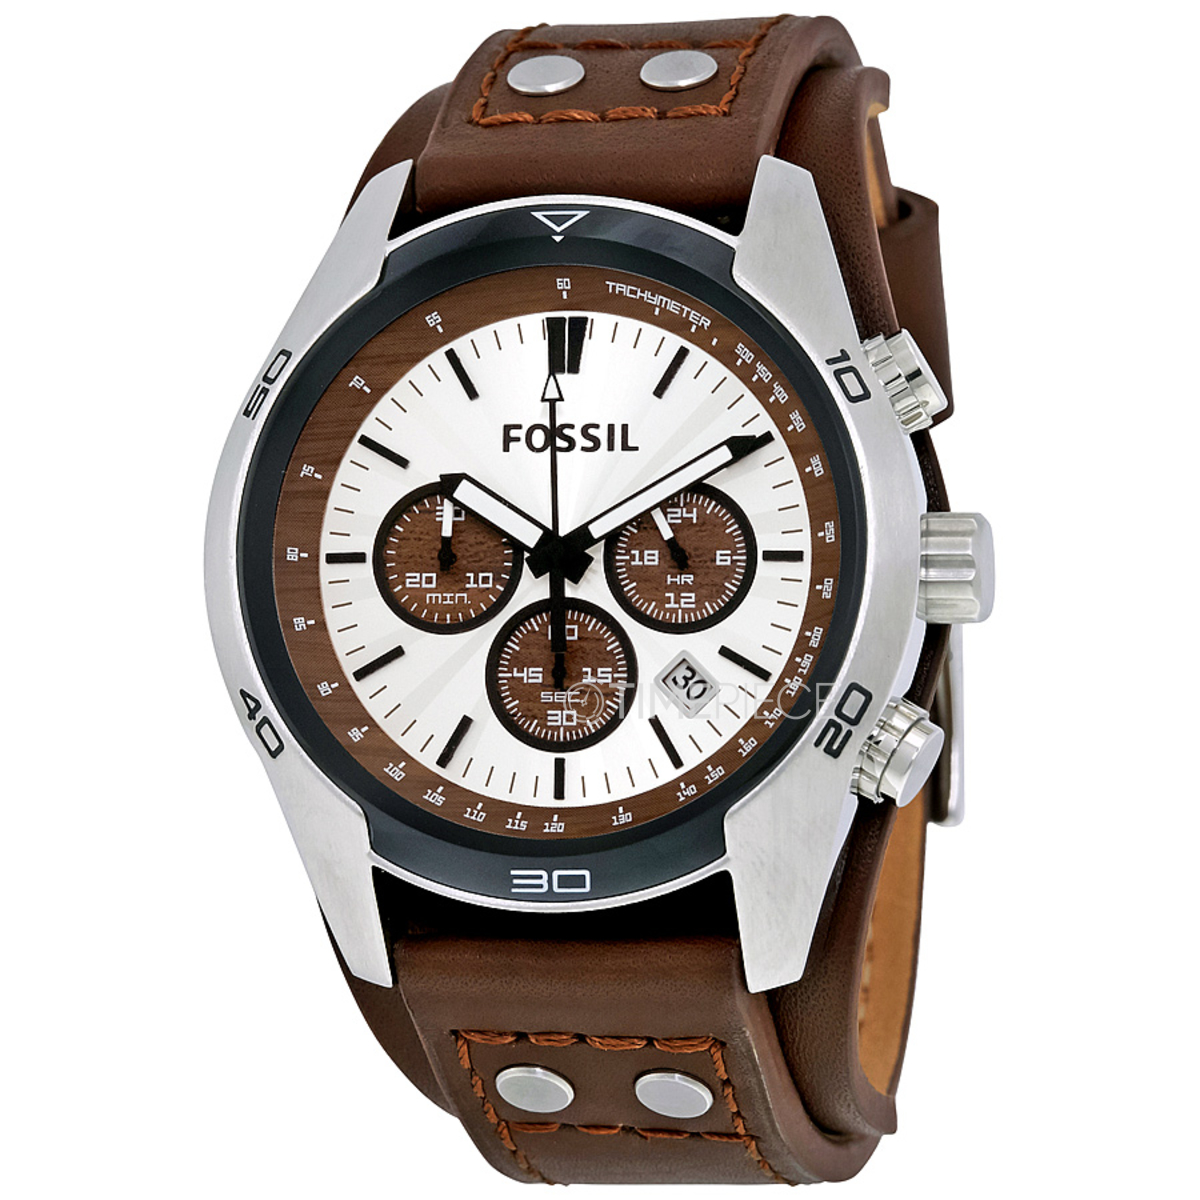 CH2565 Cuff Chronograph Mens Fossil Watch Leather Coachman